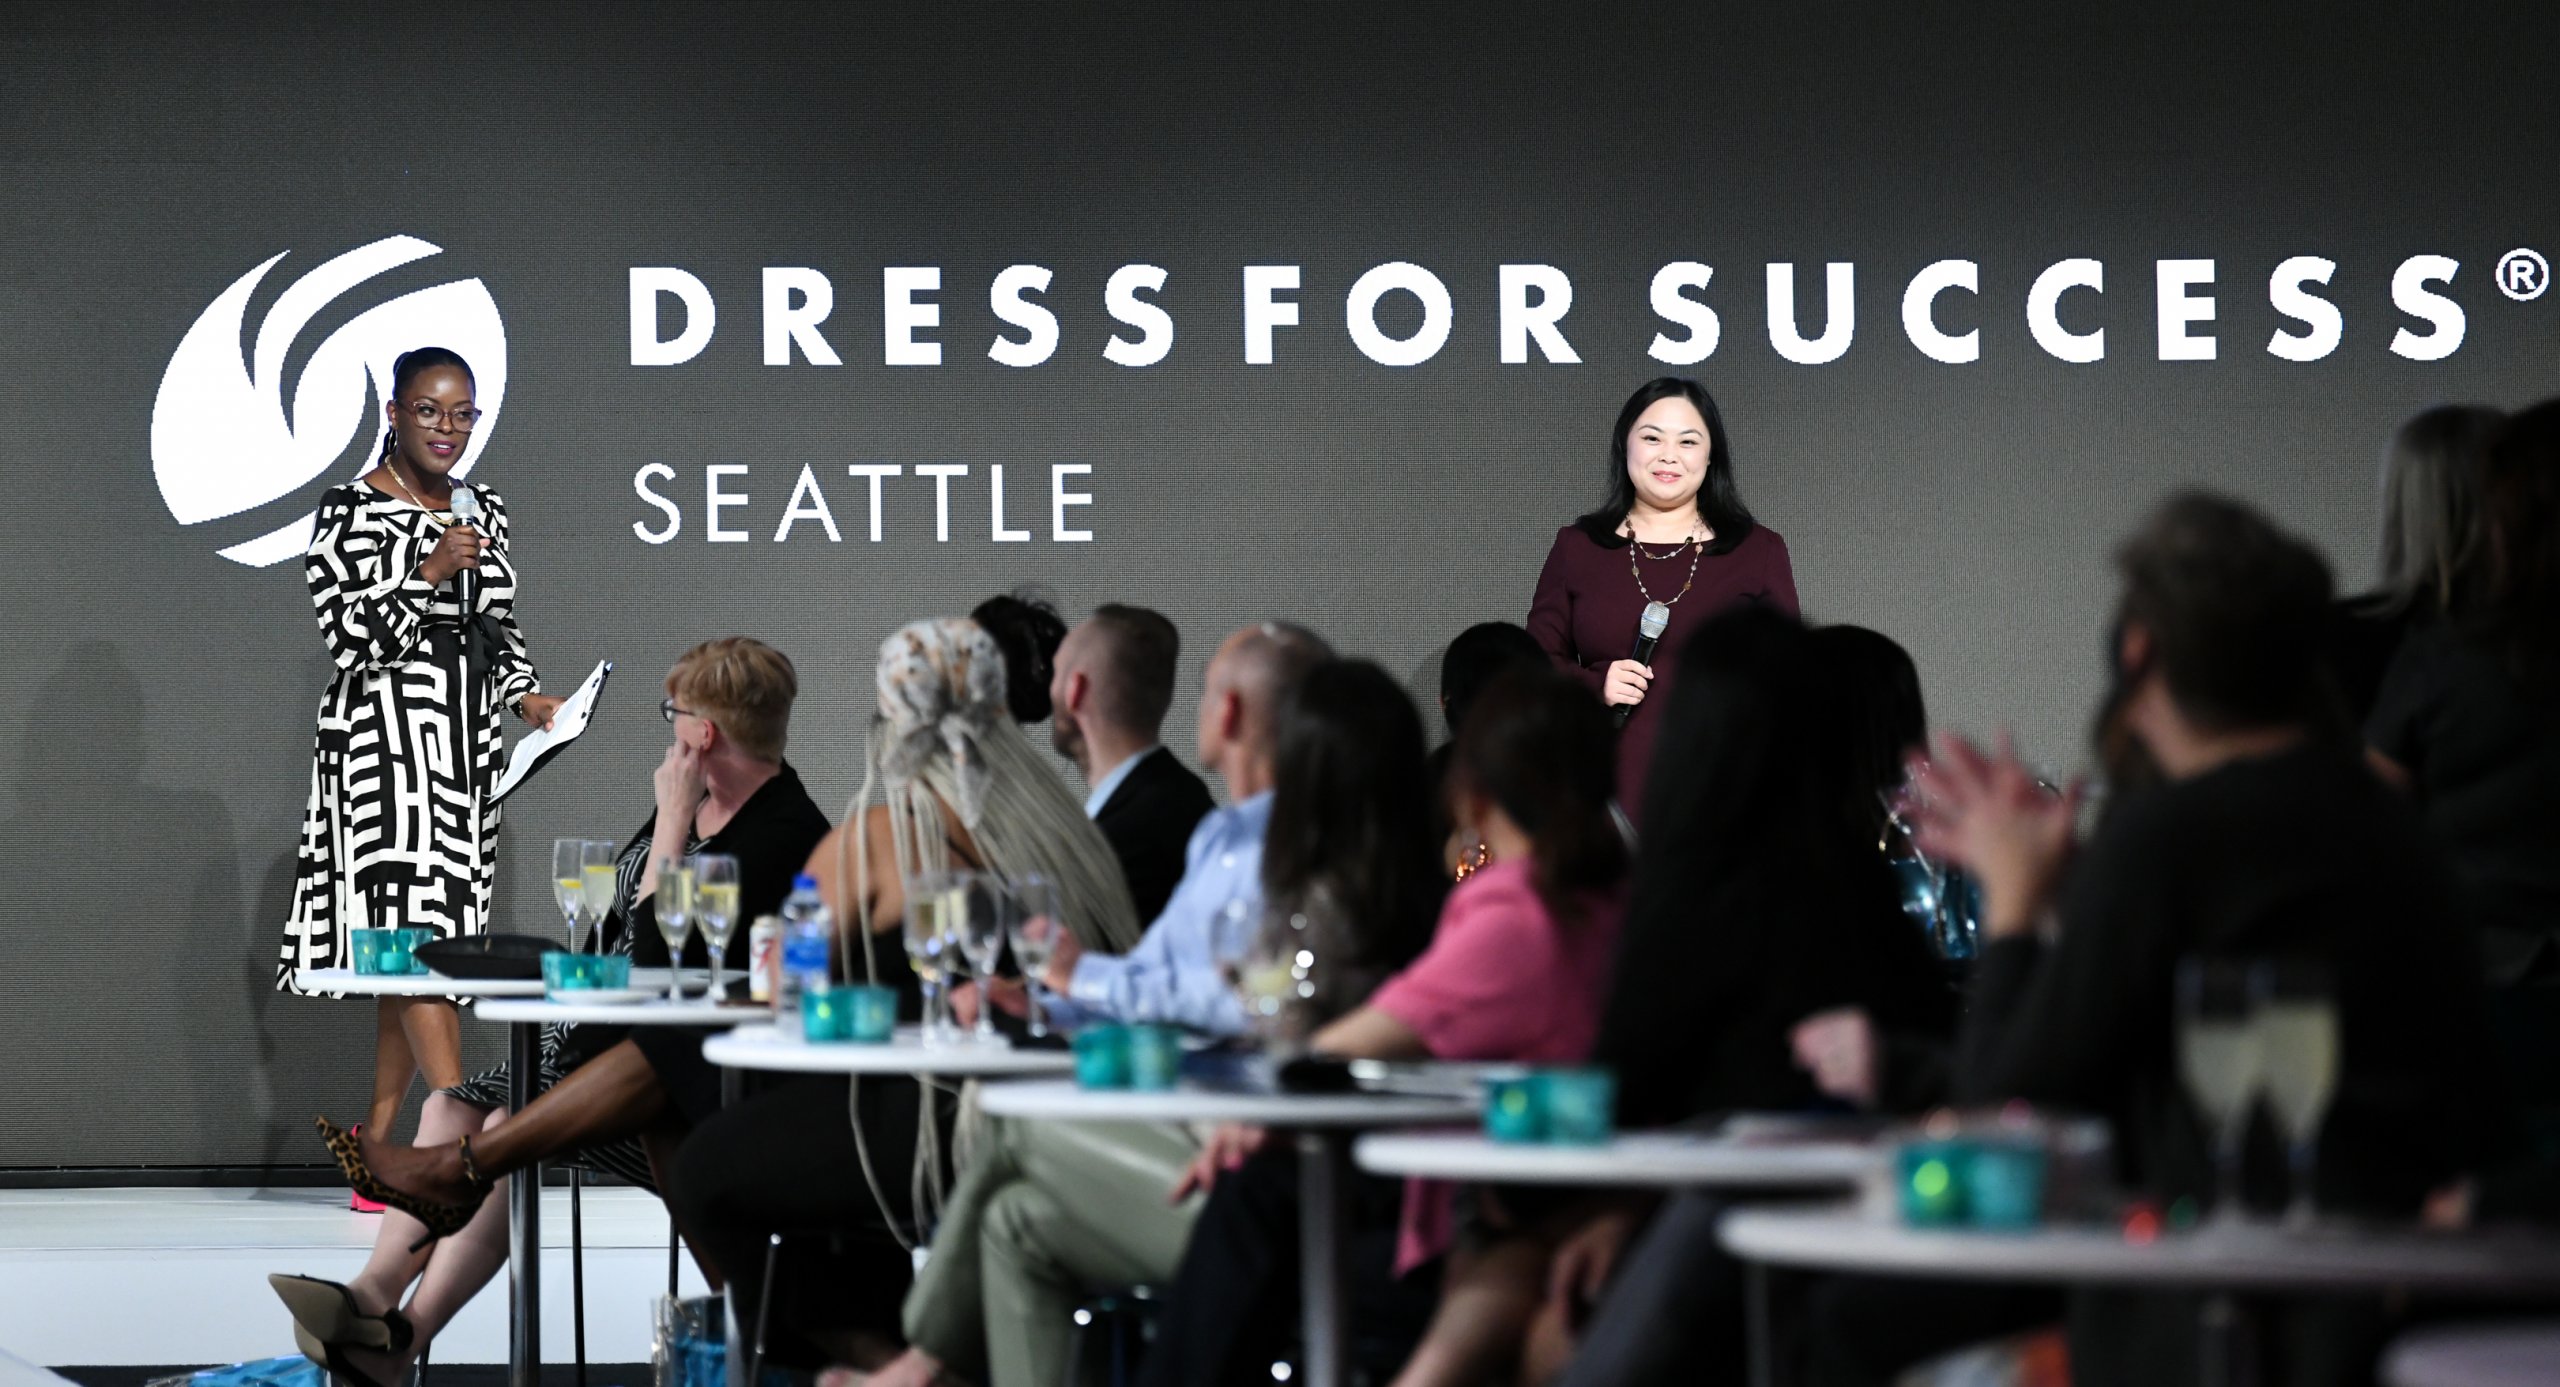 Two women, Keisha (L) and Belle (R) share the mission of Dress For Success on stage